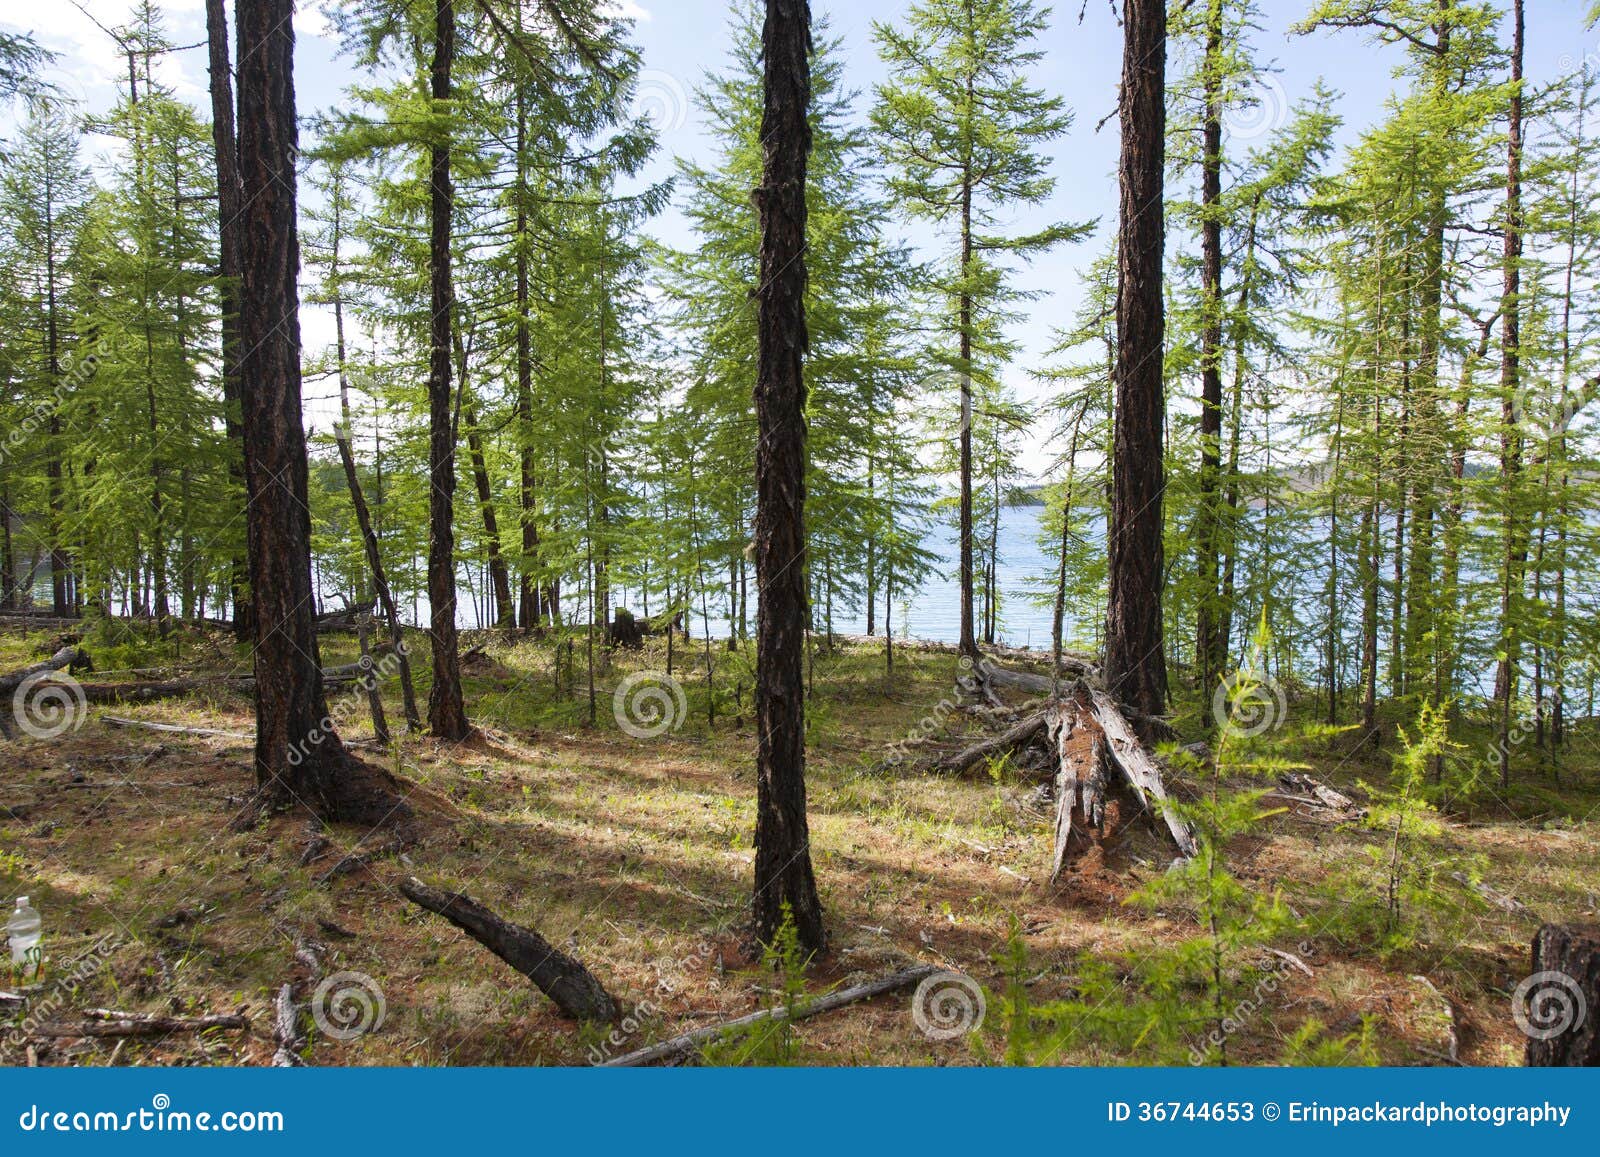 forests in front of khovsgol lake